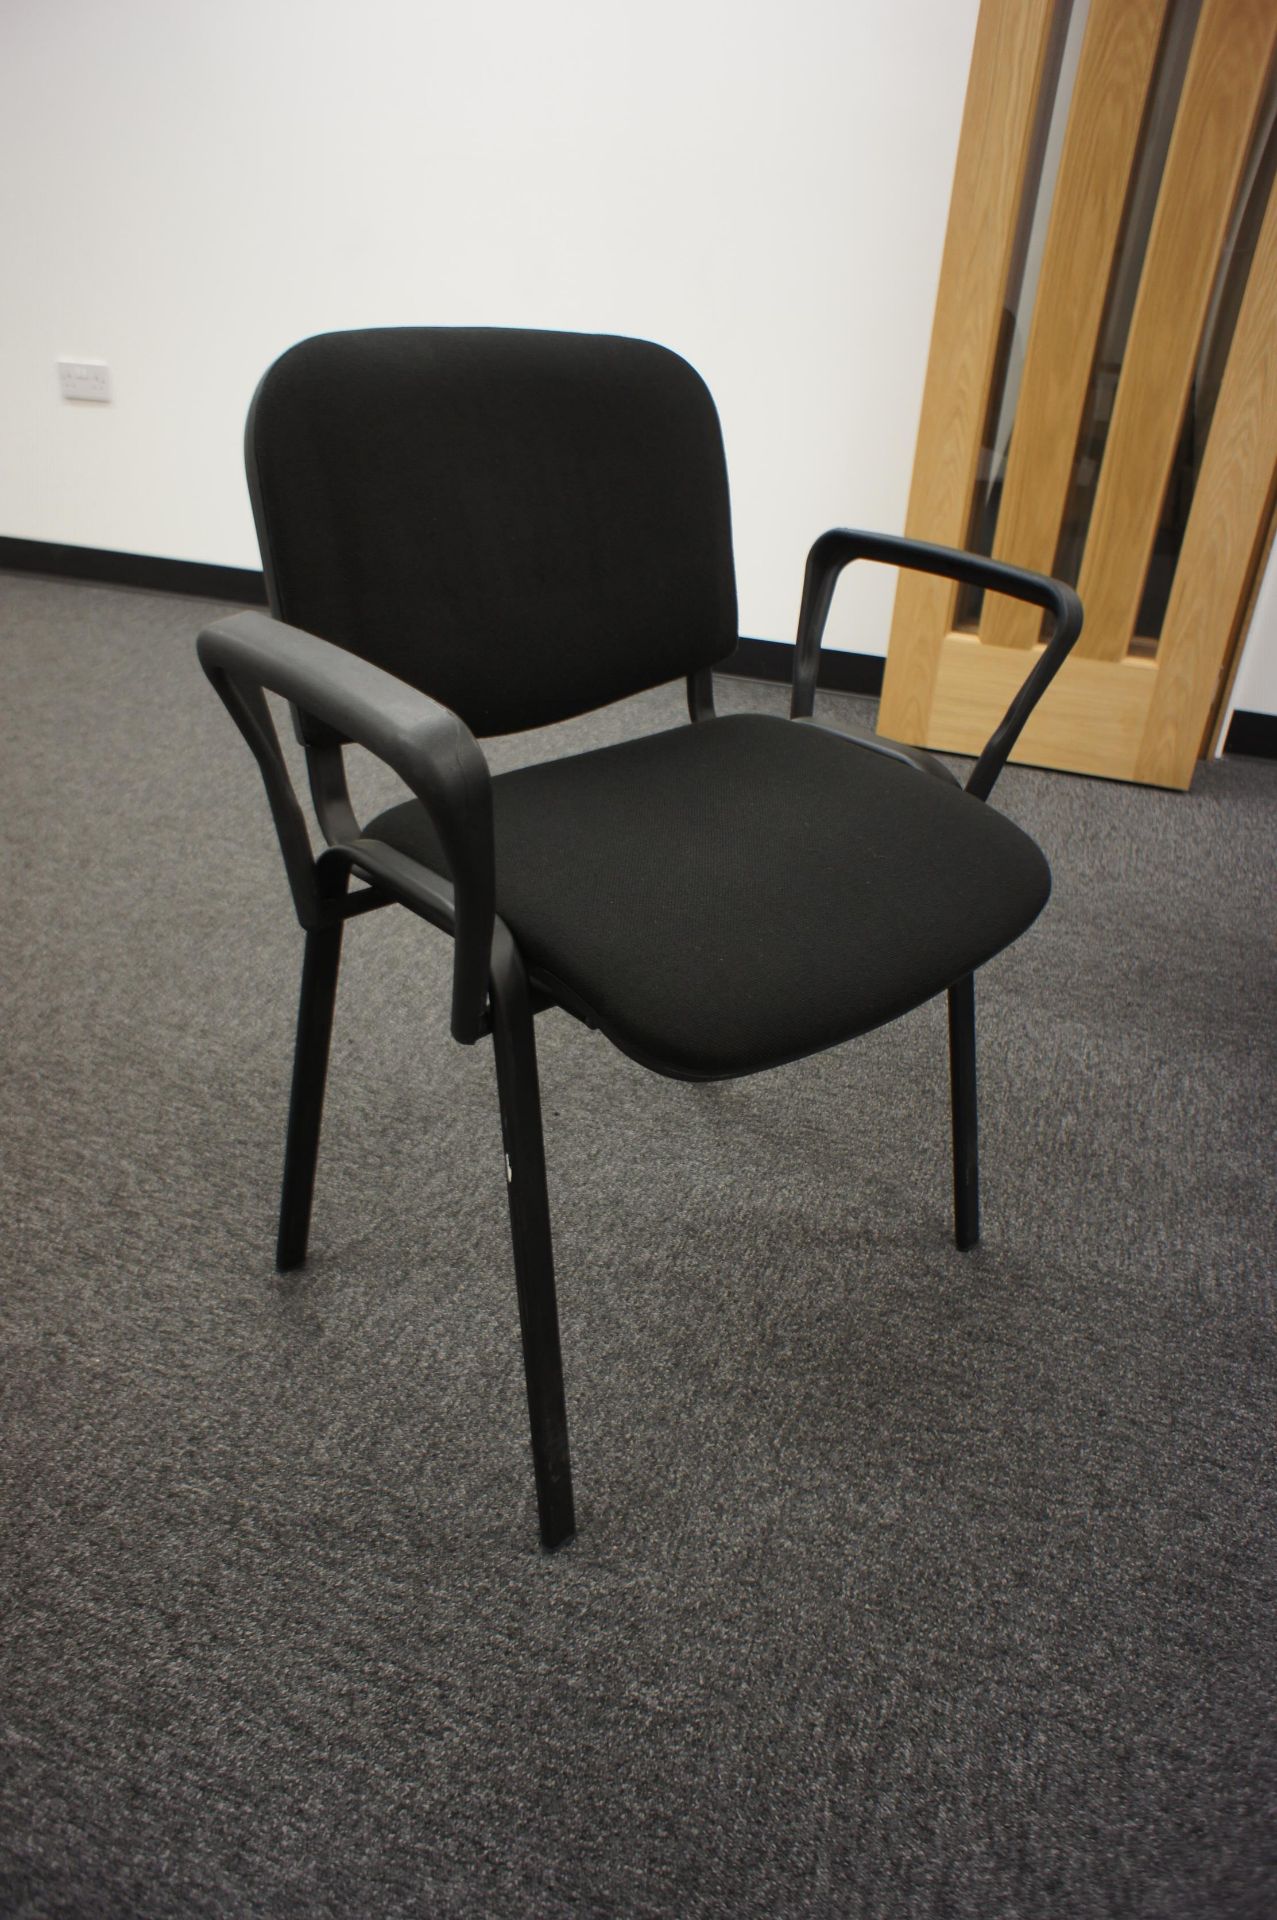 10 Upholstered Meeting Chairs - Image 3 of 3